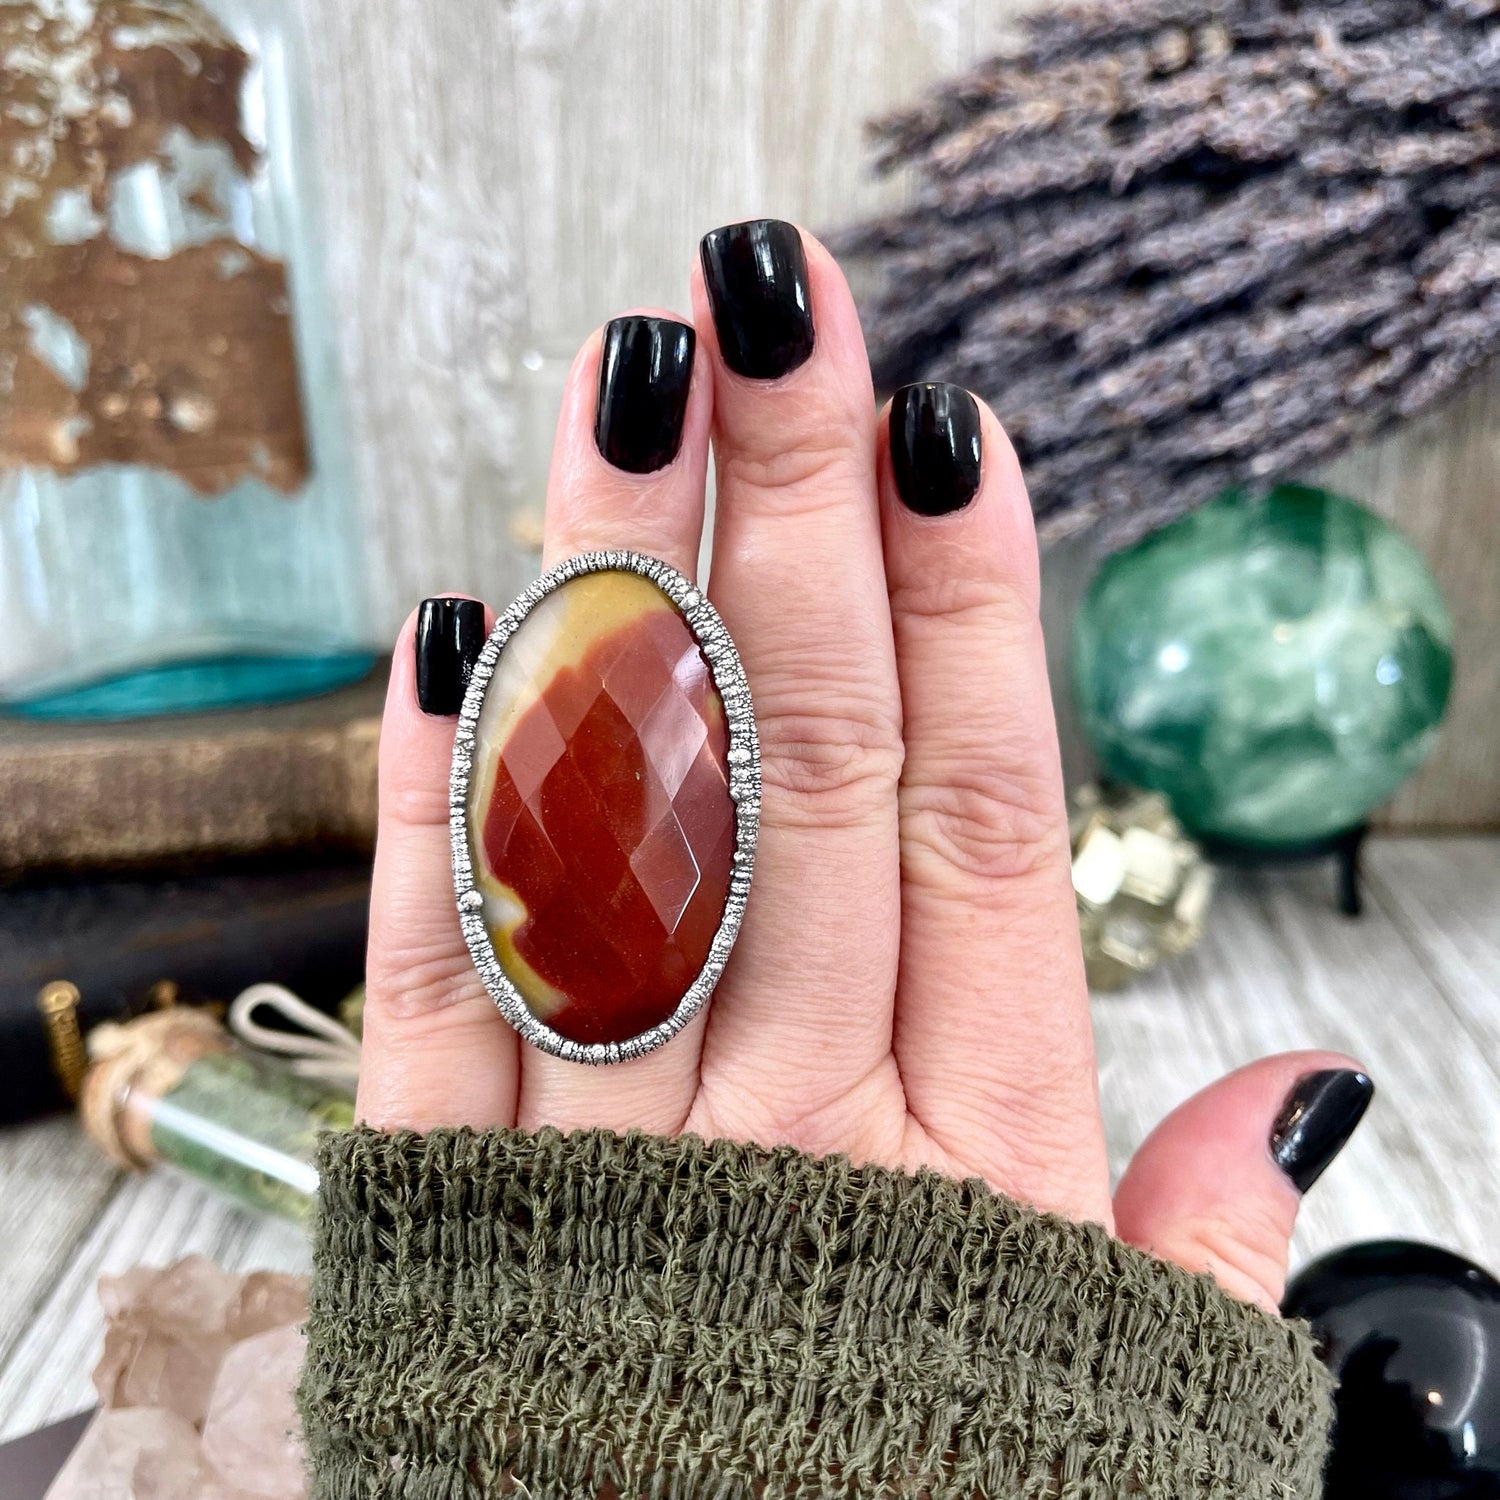 Size 6.5 Big Mookaite Stone Statement Ring in Fine Silver / Foxlark Collection - One of a Kind / Big Crystal Ring Witchy Jewelry